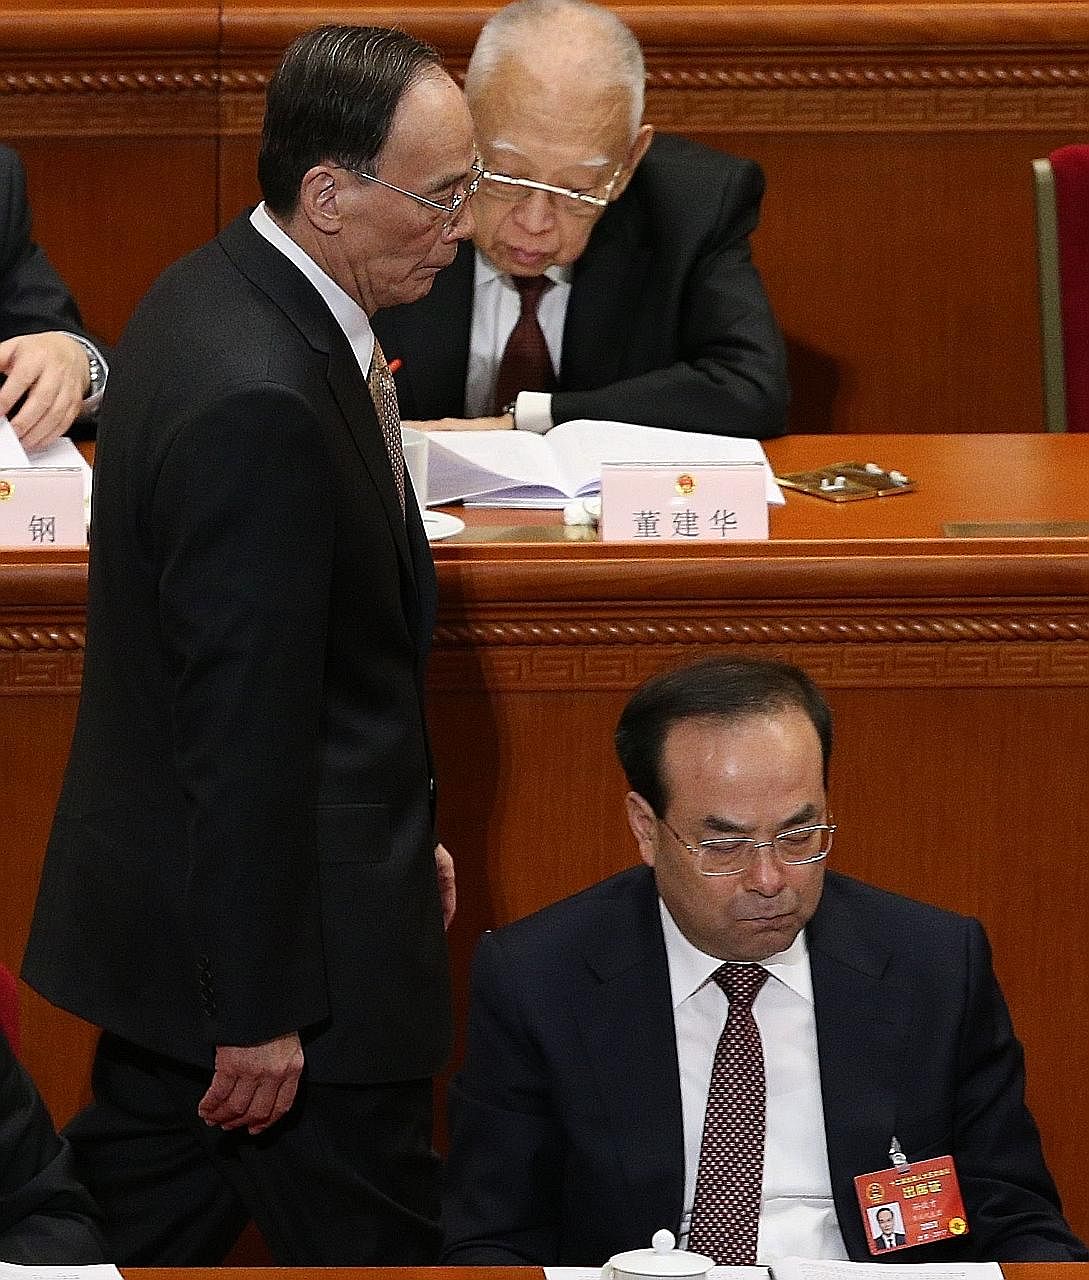 Mr Sun Zhengcai (right), seen in a March file photo, is being investigated by the Central Commission for Discipline Inspection, whose chief is Mr Wang Qishan (left).